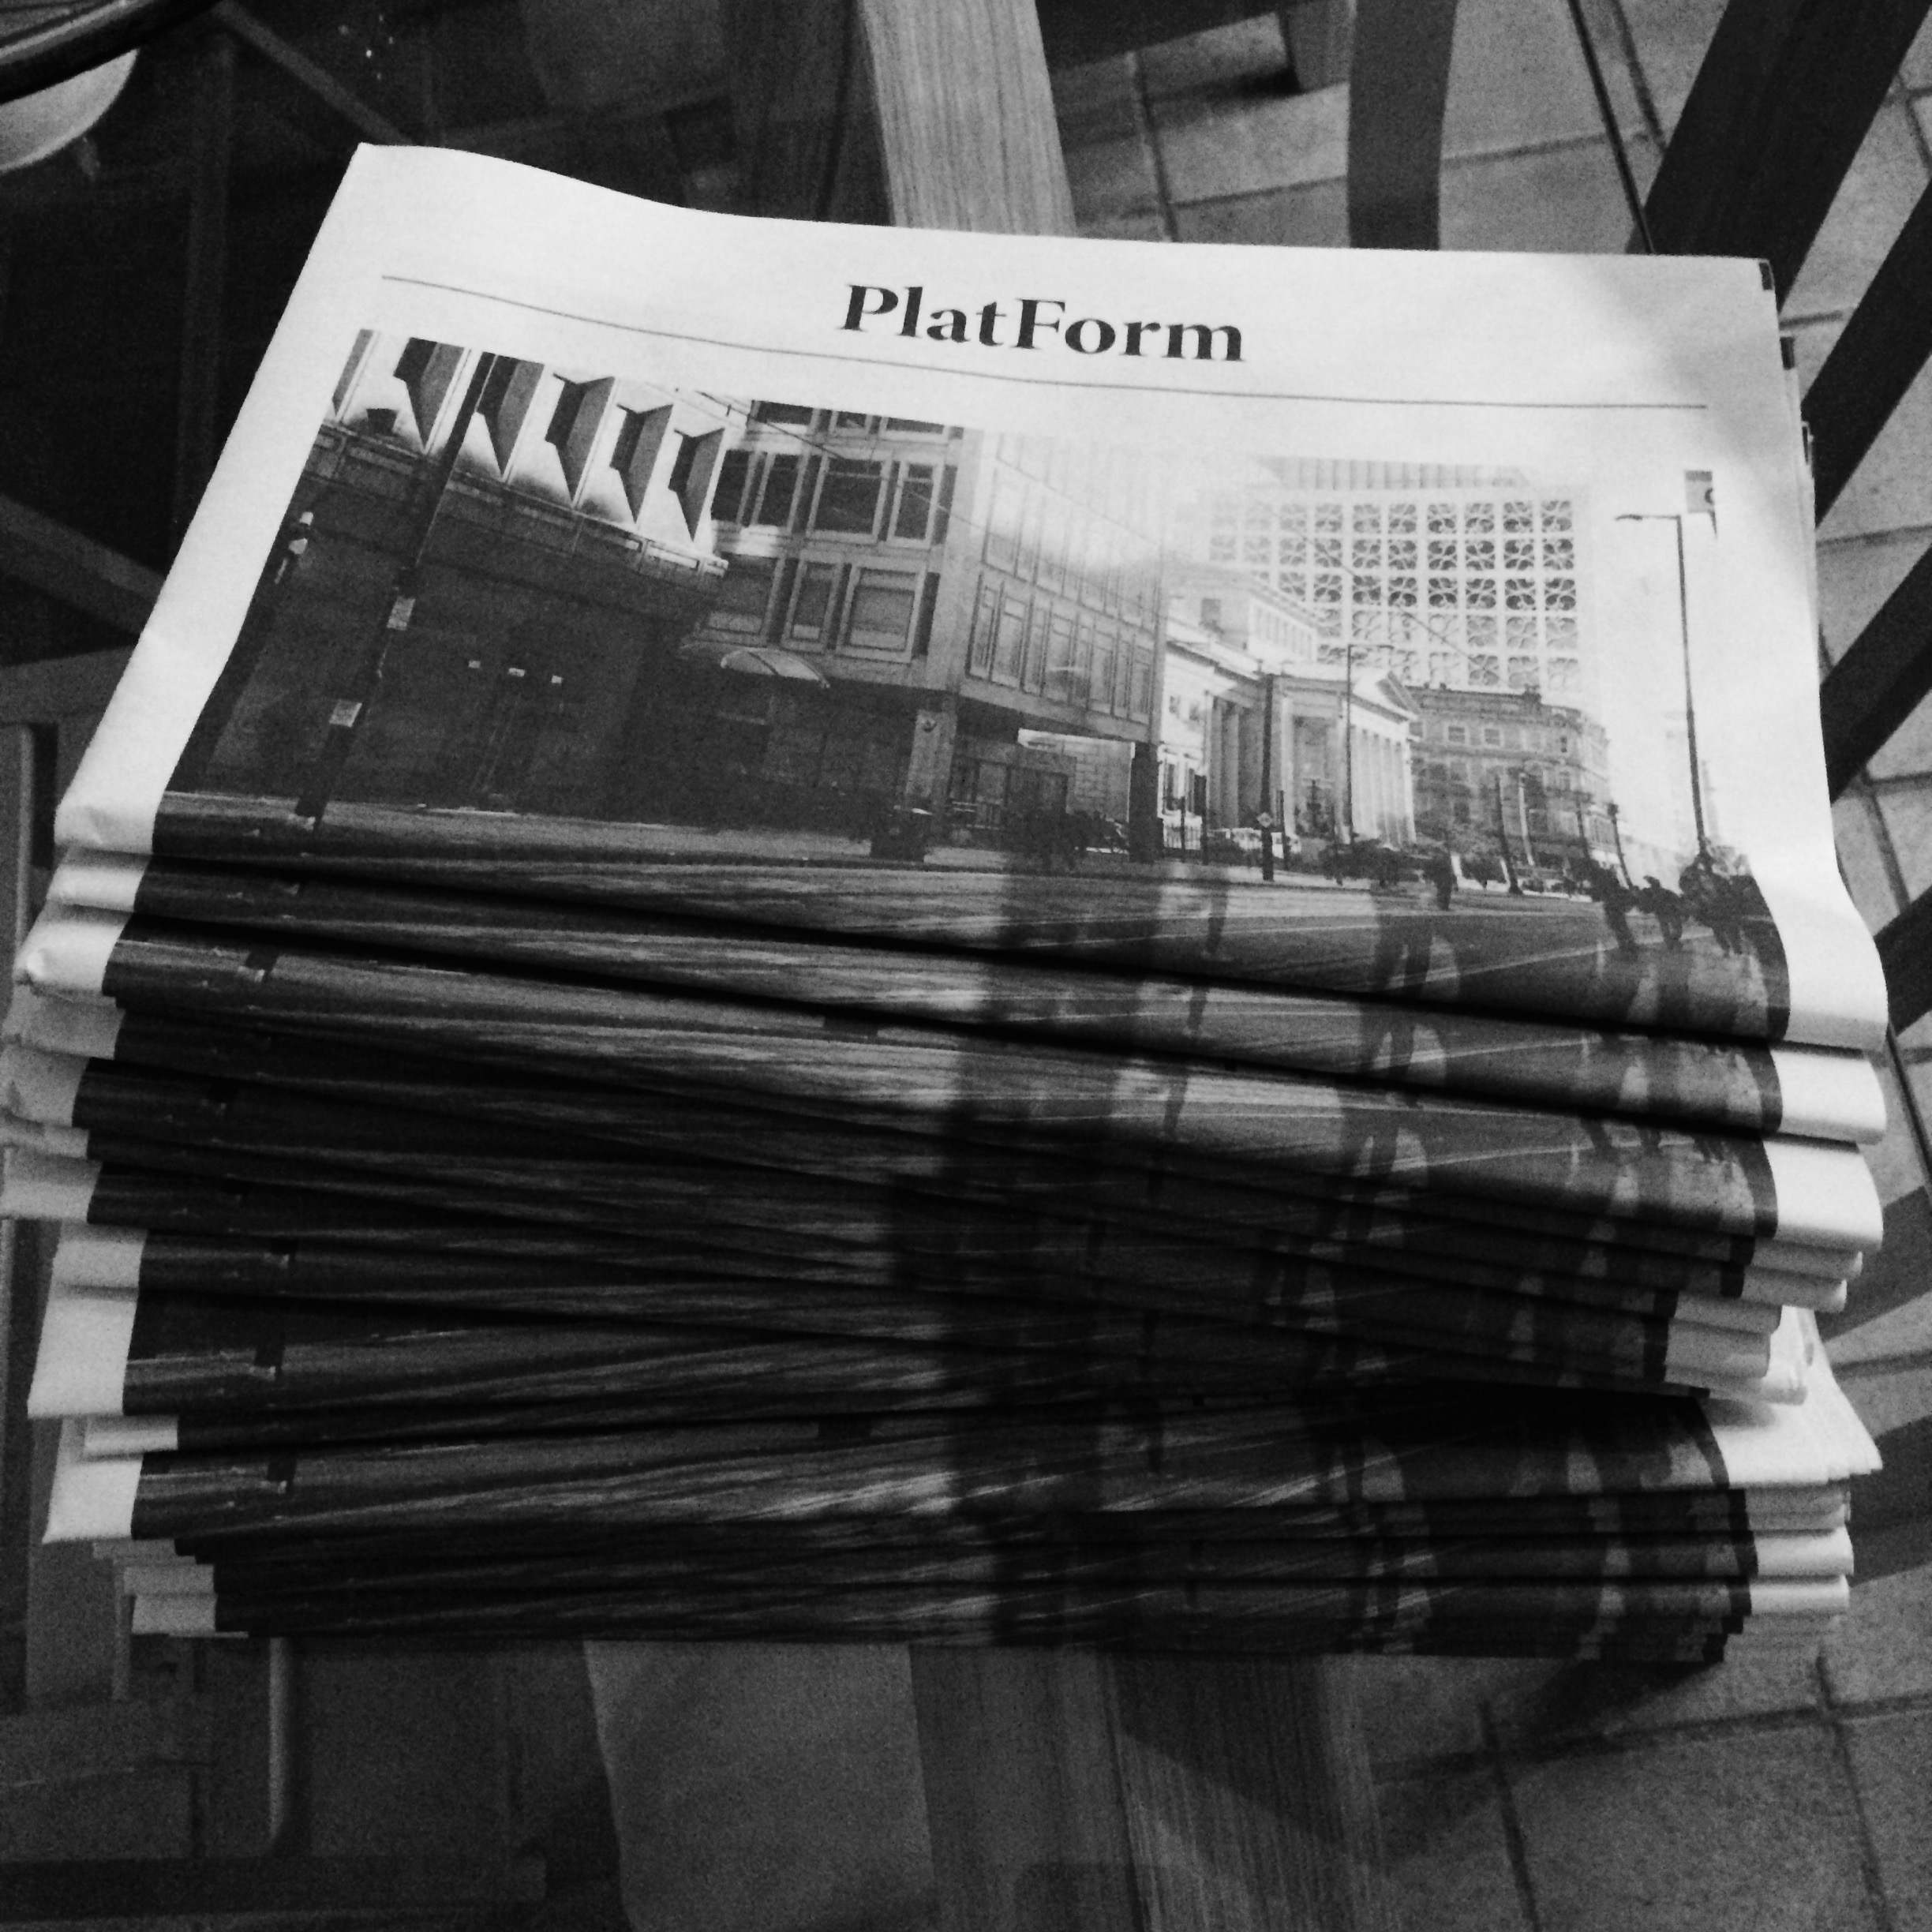  Self-published newspaper / artist's book, PlatForm, printed December 2016. A photographic narrative and poem about everyday journeys through Manchester. Limited edition distributed in public areas of Manchester. 